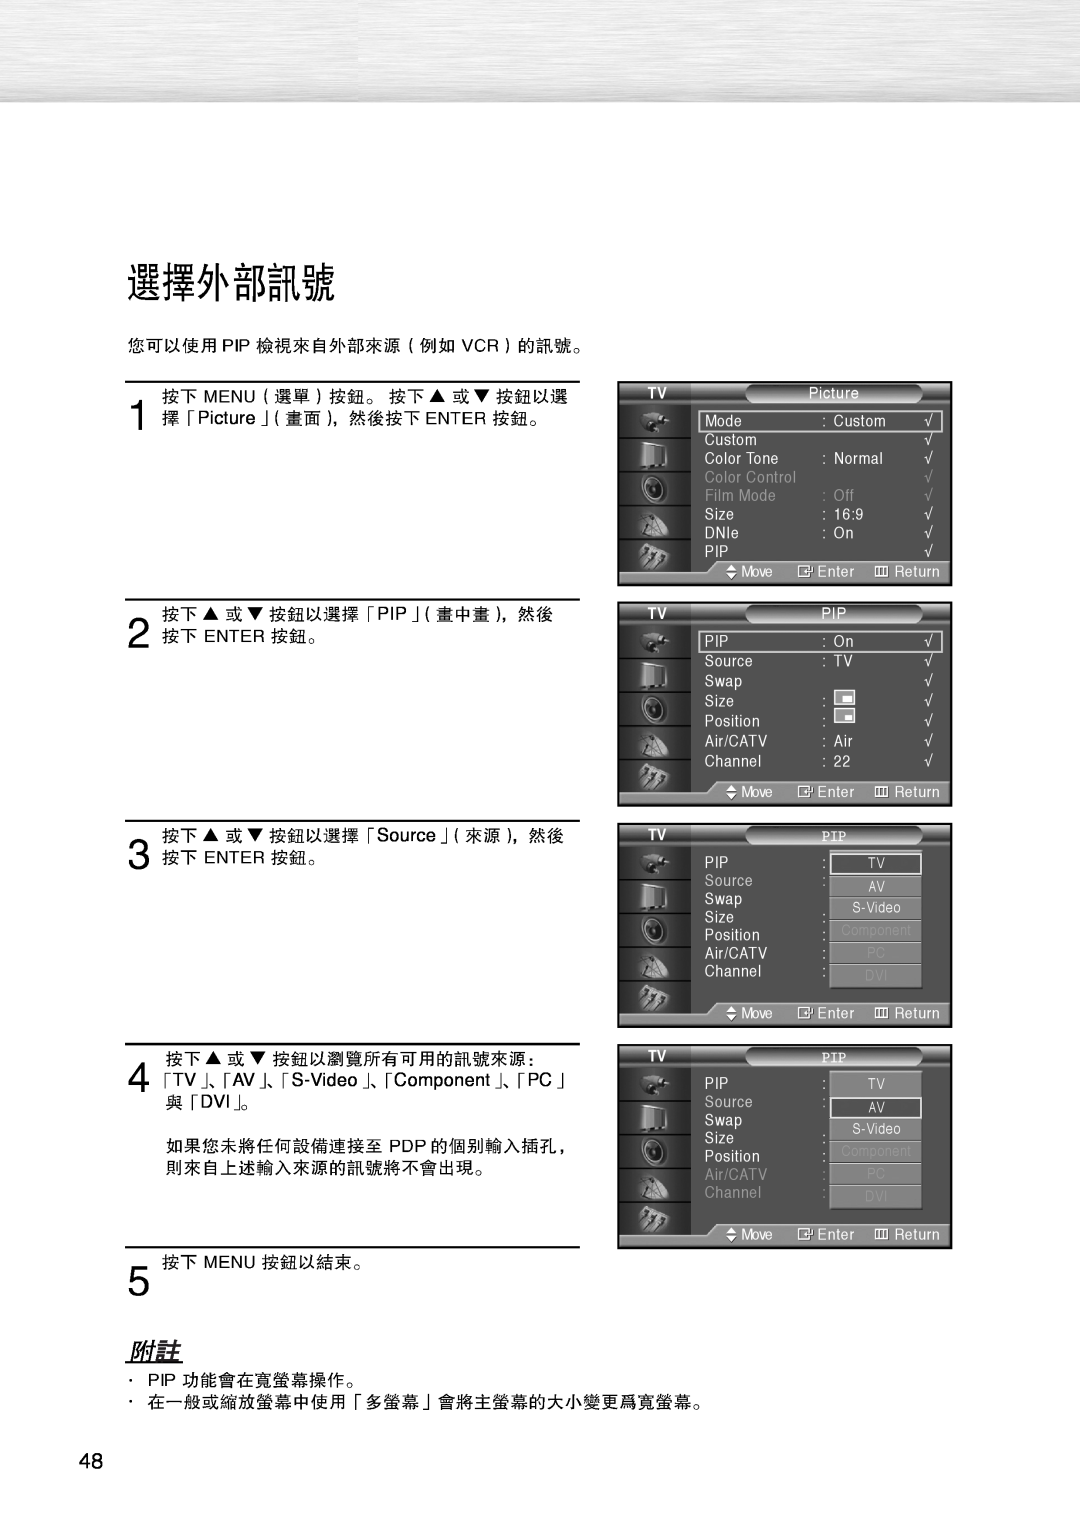 Samsung PL-42D4S manual PIP Source, Color Control, Film Mode, Air/CATV, Channel 